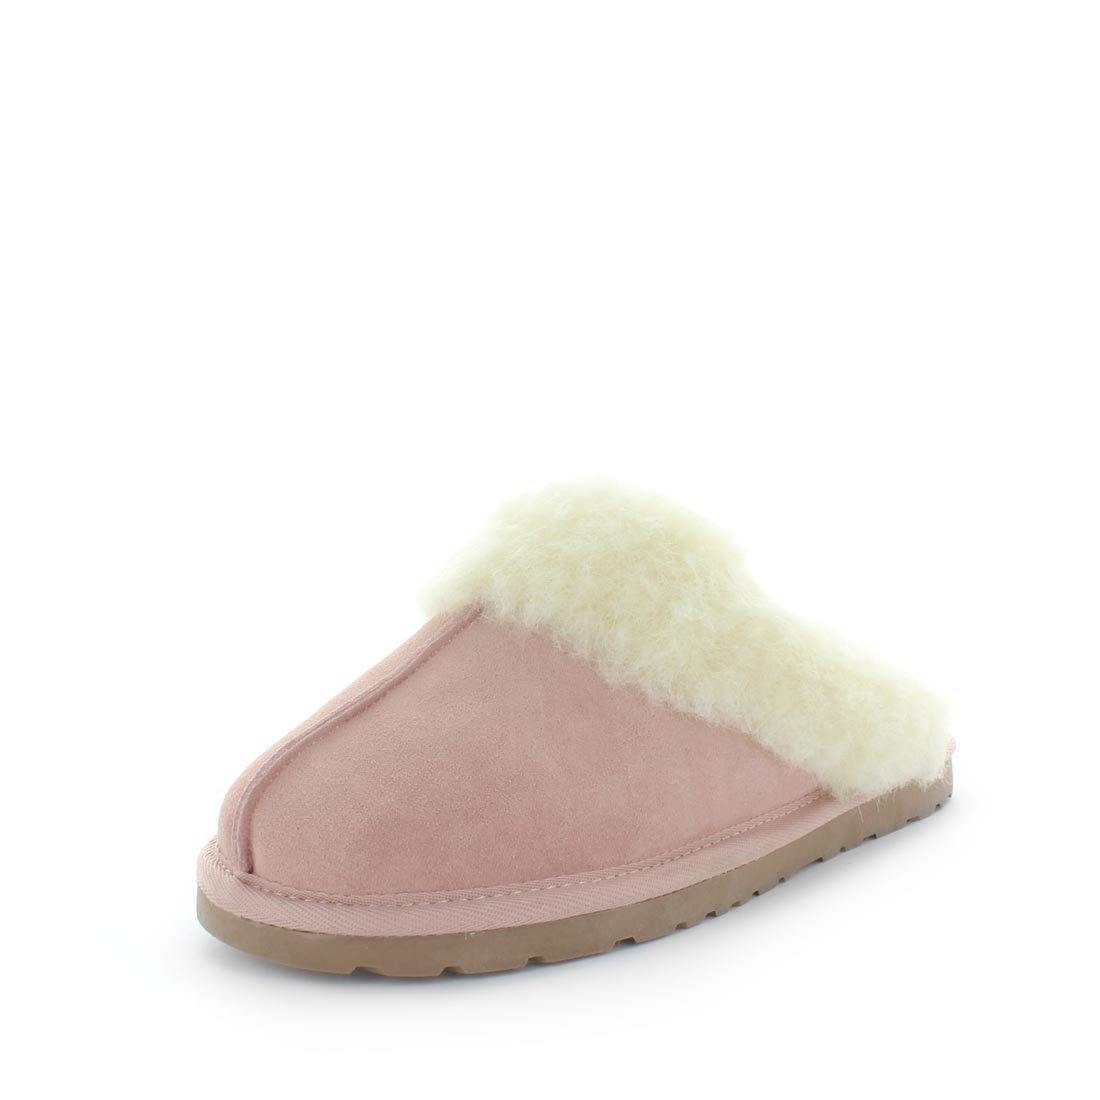 Just Bee UGGs- cita- womens little slip-on slipper style, 100% wool, leather shoe with detailed upper and over hanging wool on the trim - womens comfort slippers - womens best slippers- UGGs (4865771143247)